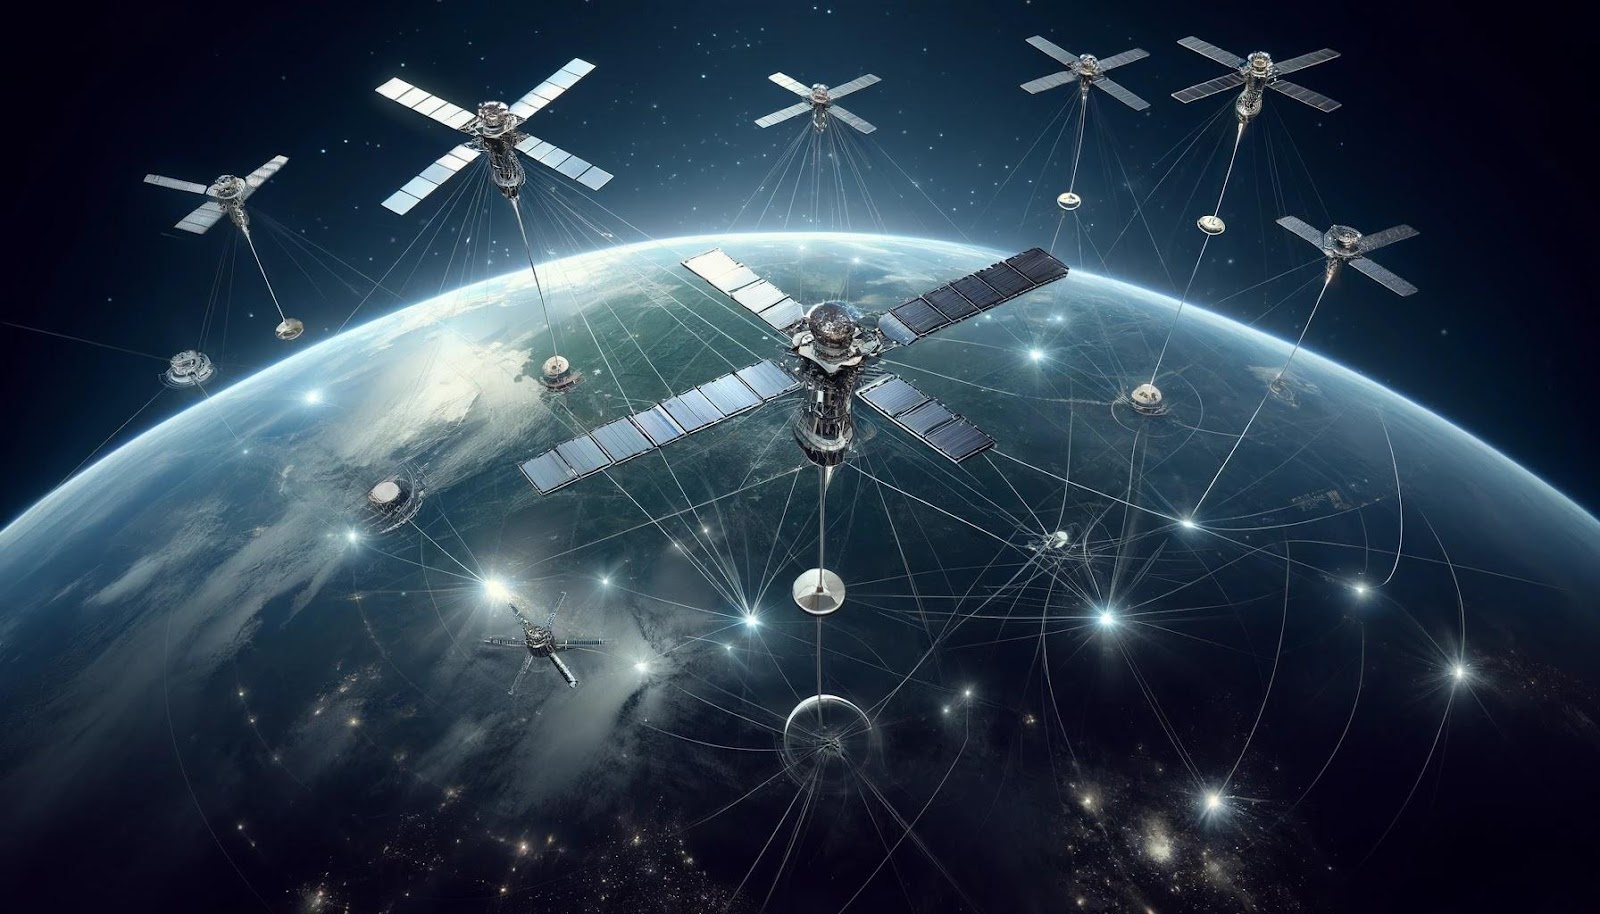 Vast regions of the planet remain offline or suffer from poor connectivity due to the geographical and economic challenges of extending traditional internet services. Starlink's mission is to bridge this divide, utilizing a mesh of satellites to cast a net of connectivity over the Earth.